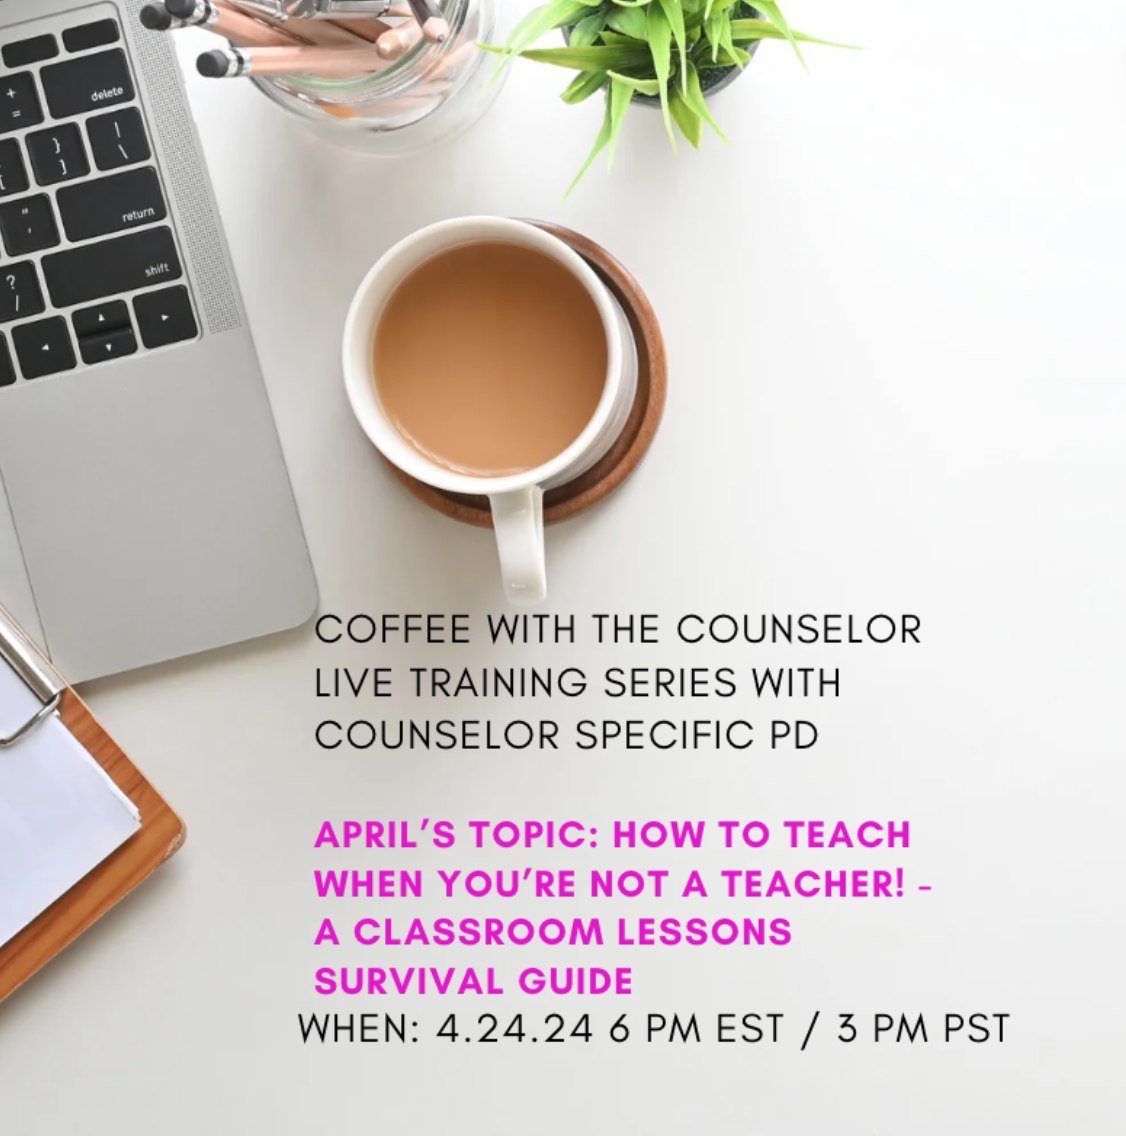 While you enjoy your Sunday Coffee and plan your week ahead, don't forget to pencil me in! ☕

Coffee with the Counselor is happening this Tuesday 4.24.24 at 6pm EST! 

The topic is: How to Teach when you&rsquo;re not a Teacher! - A Classroom Lessons 